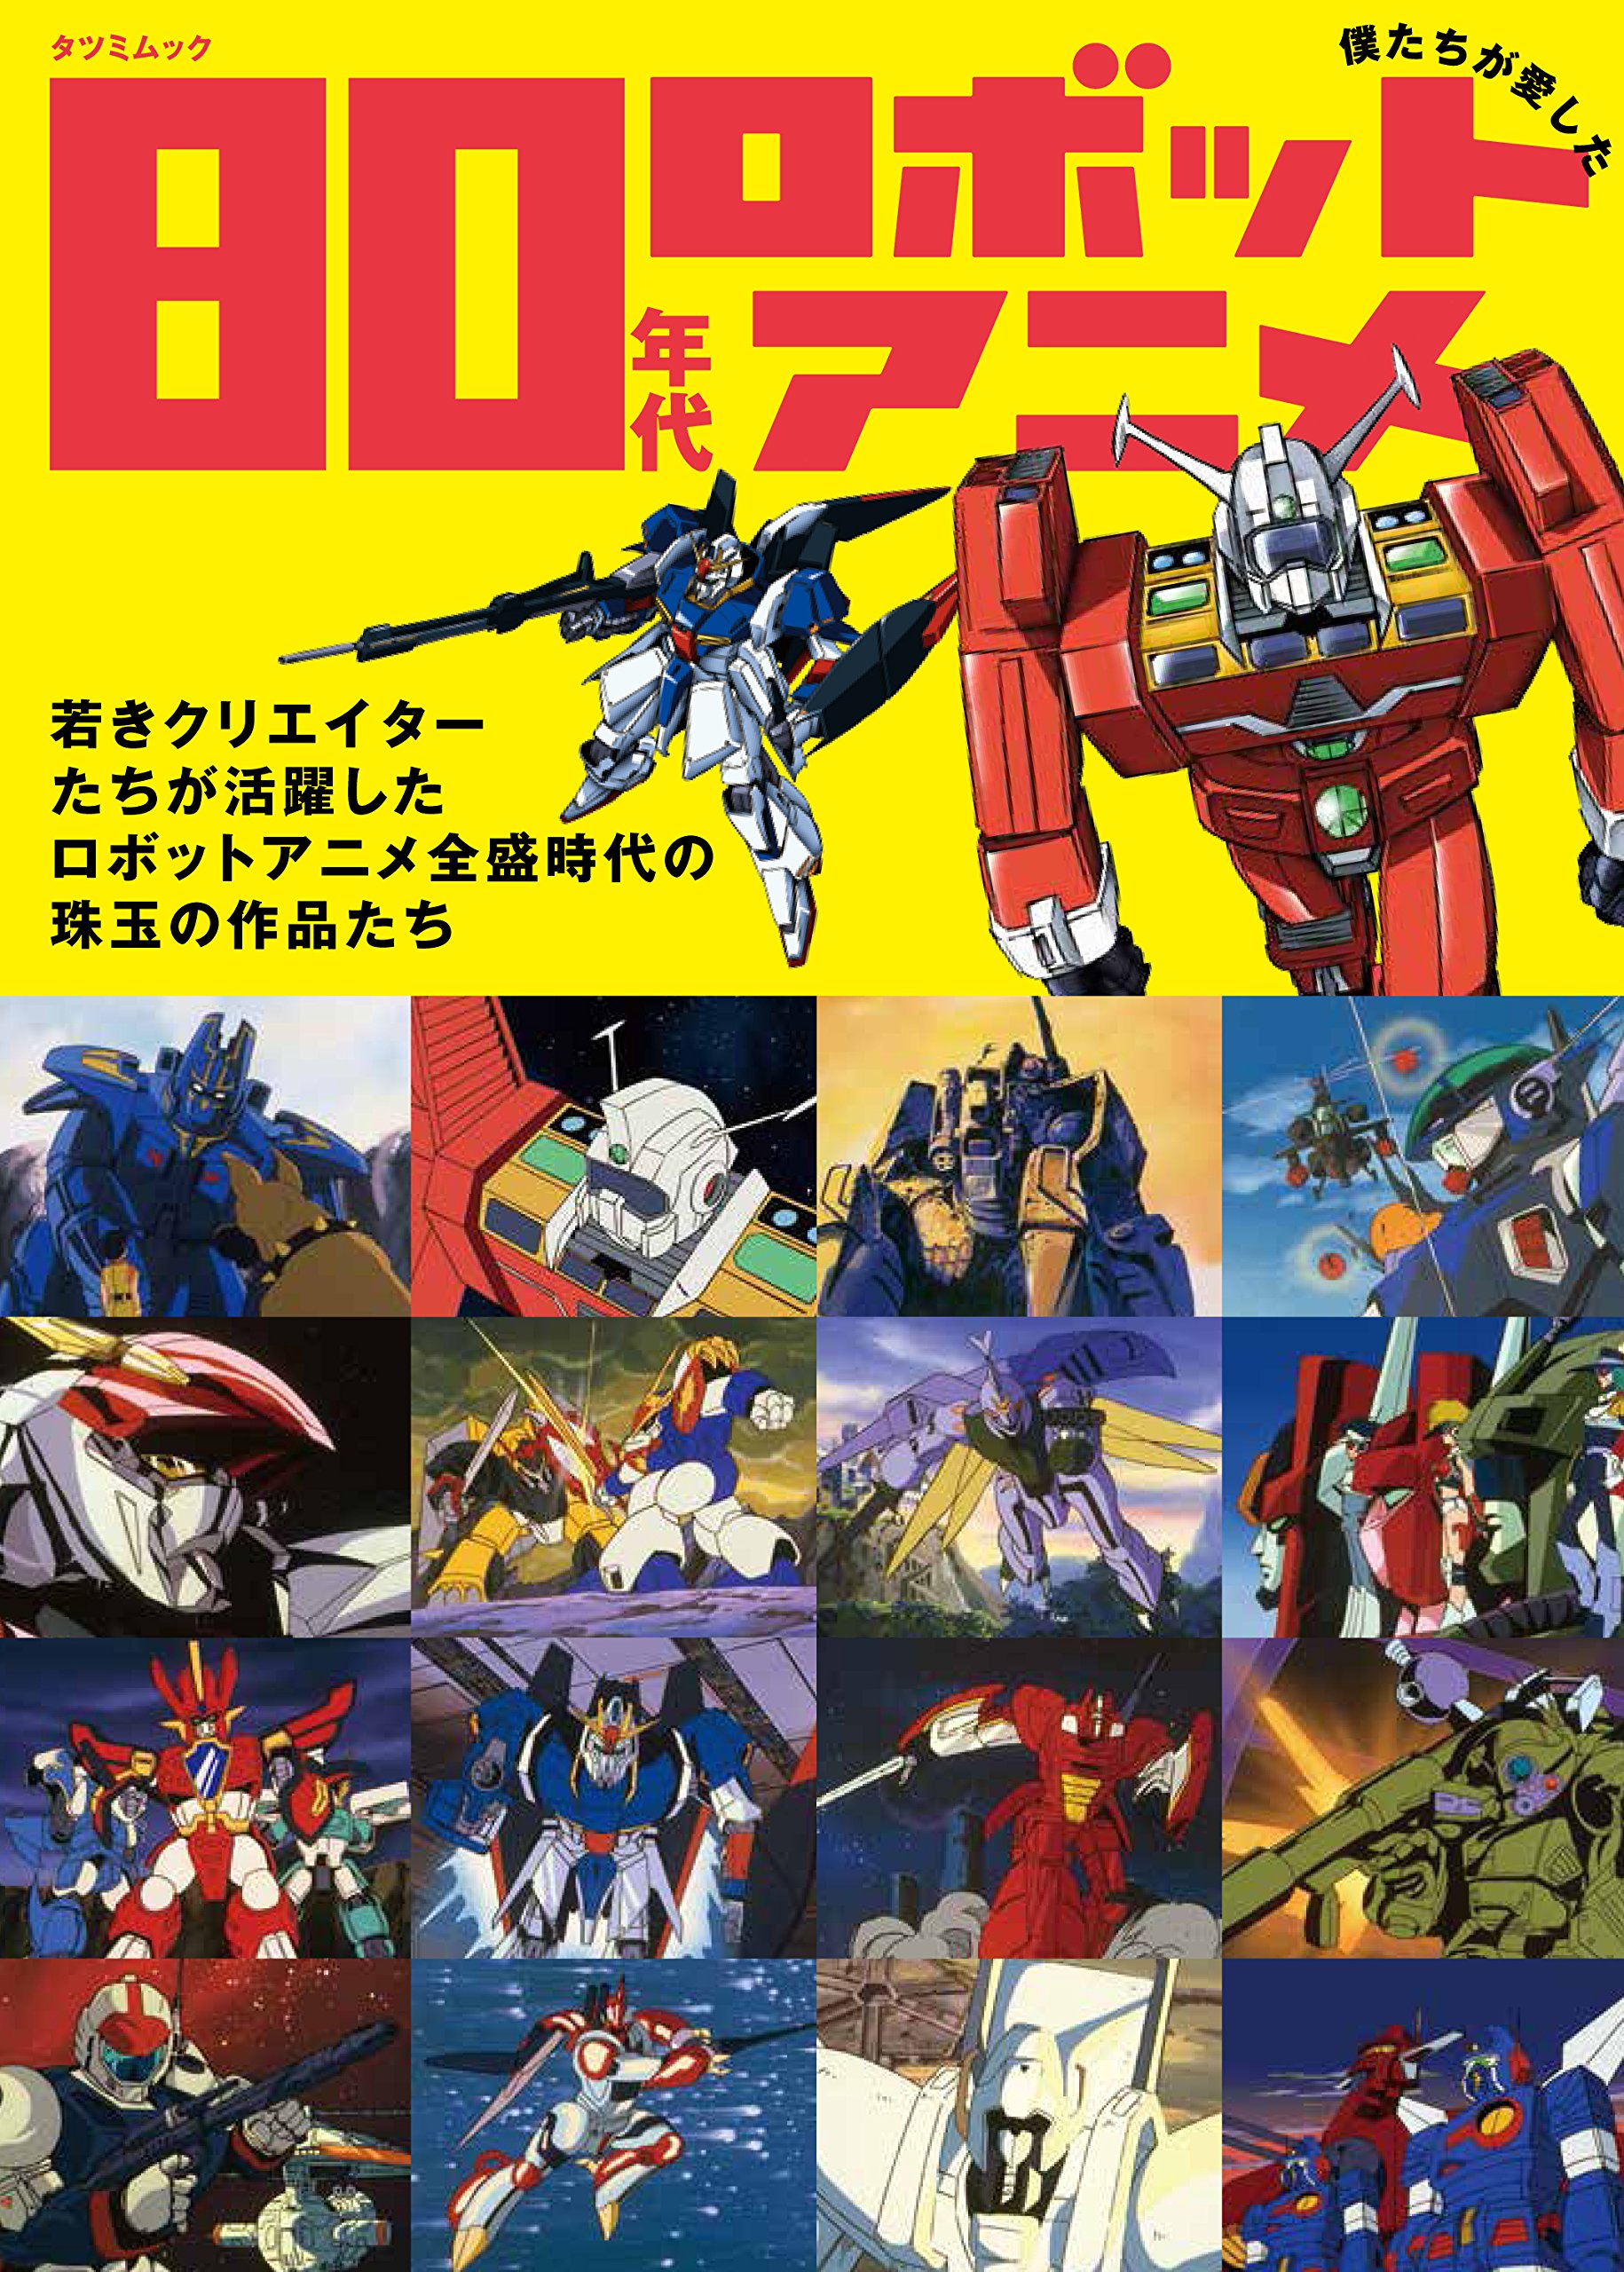 Japan 80s Robot Anime That We Loved Perfect Book Anime Art Book Online Com